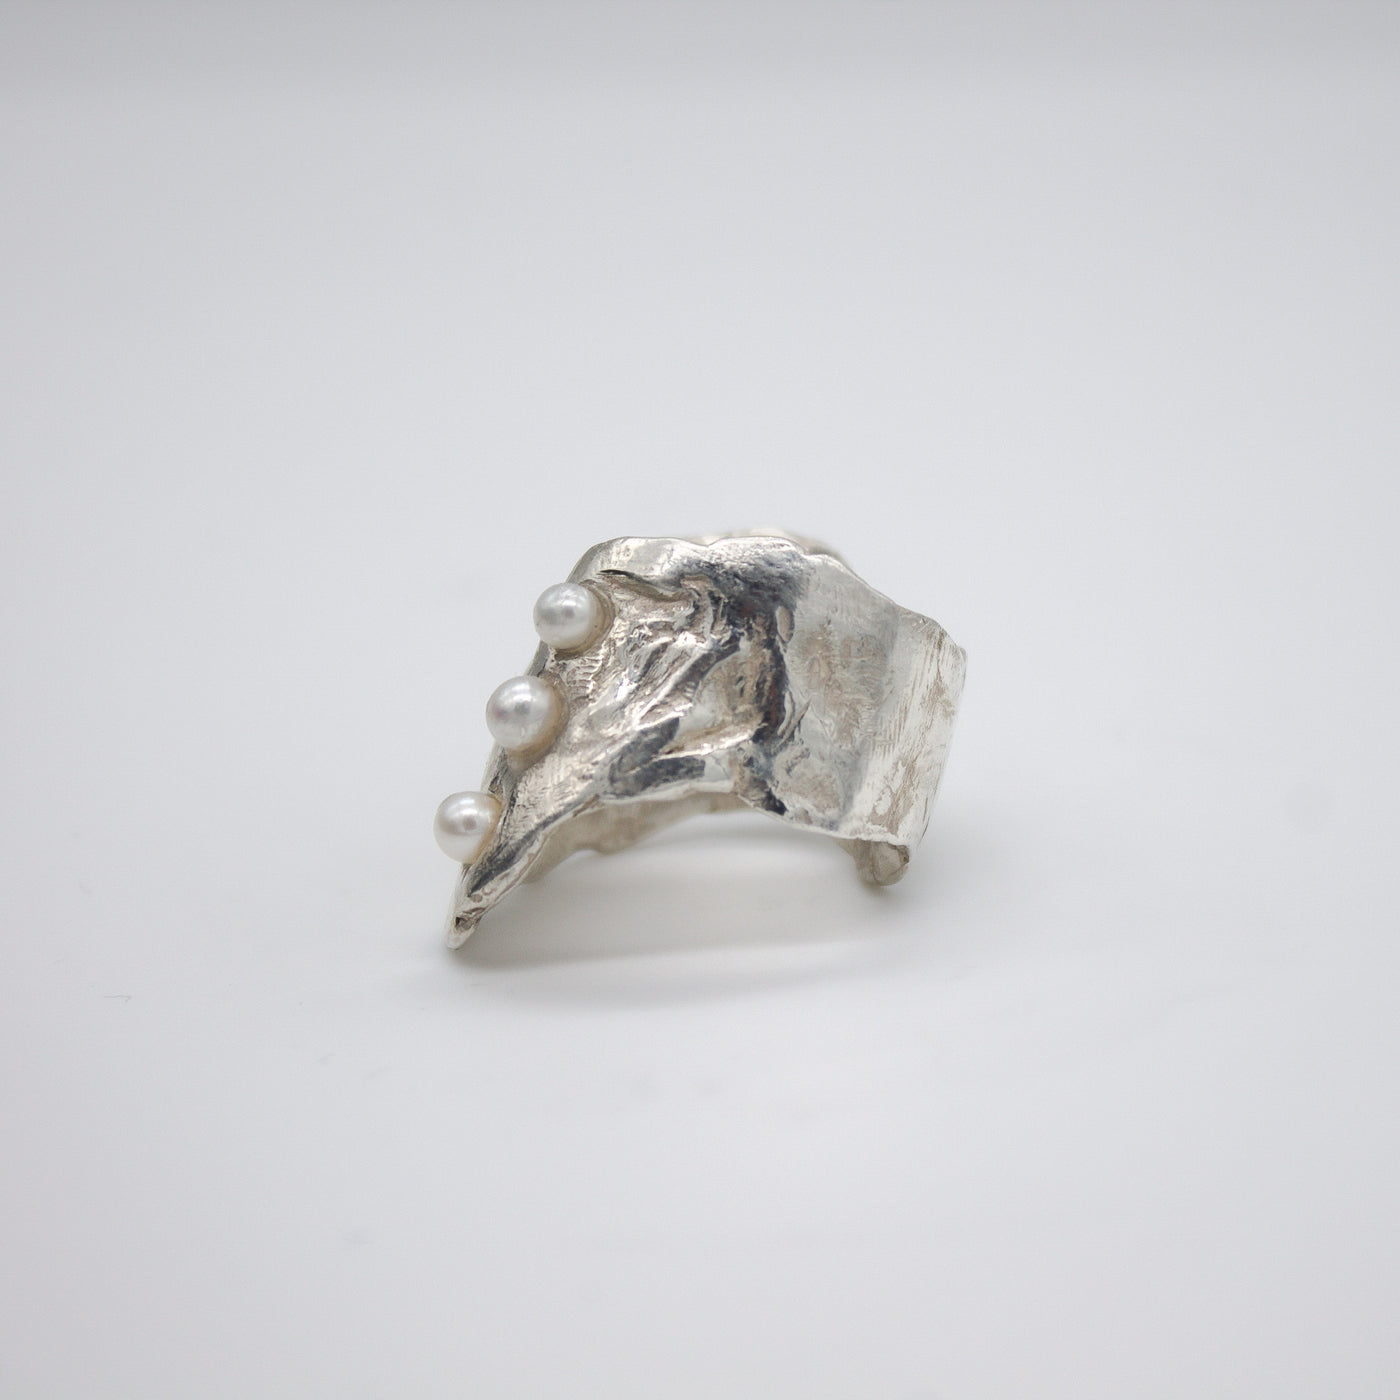 SANDVIKA // Sterling silver ring with 3 small freshwater pearls